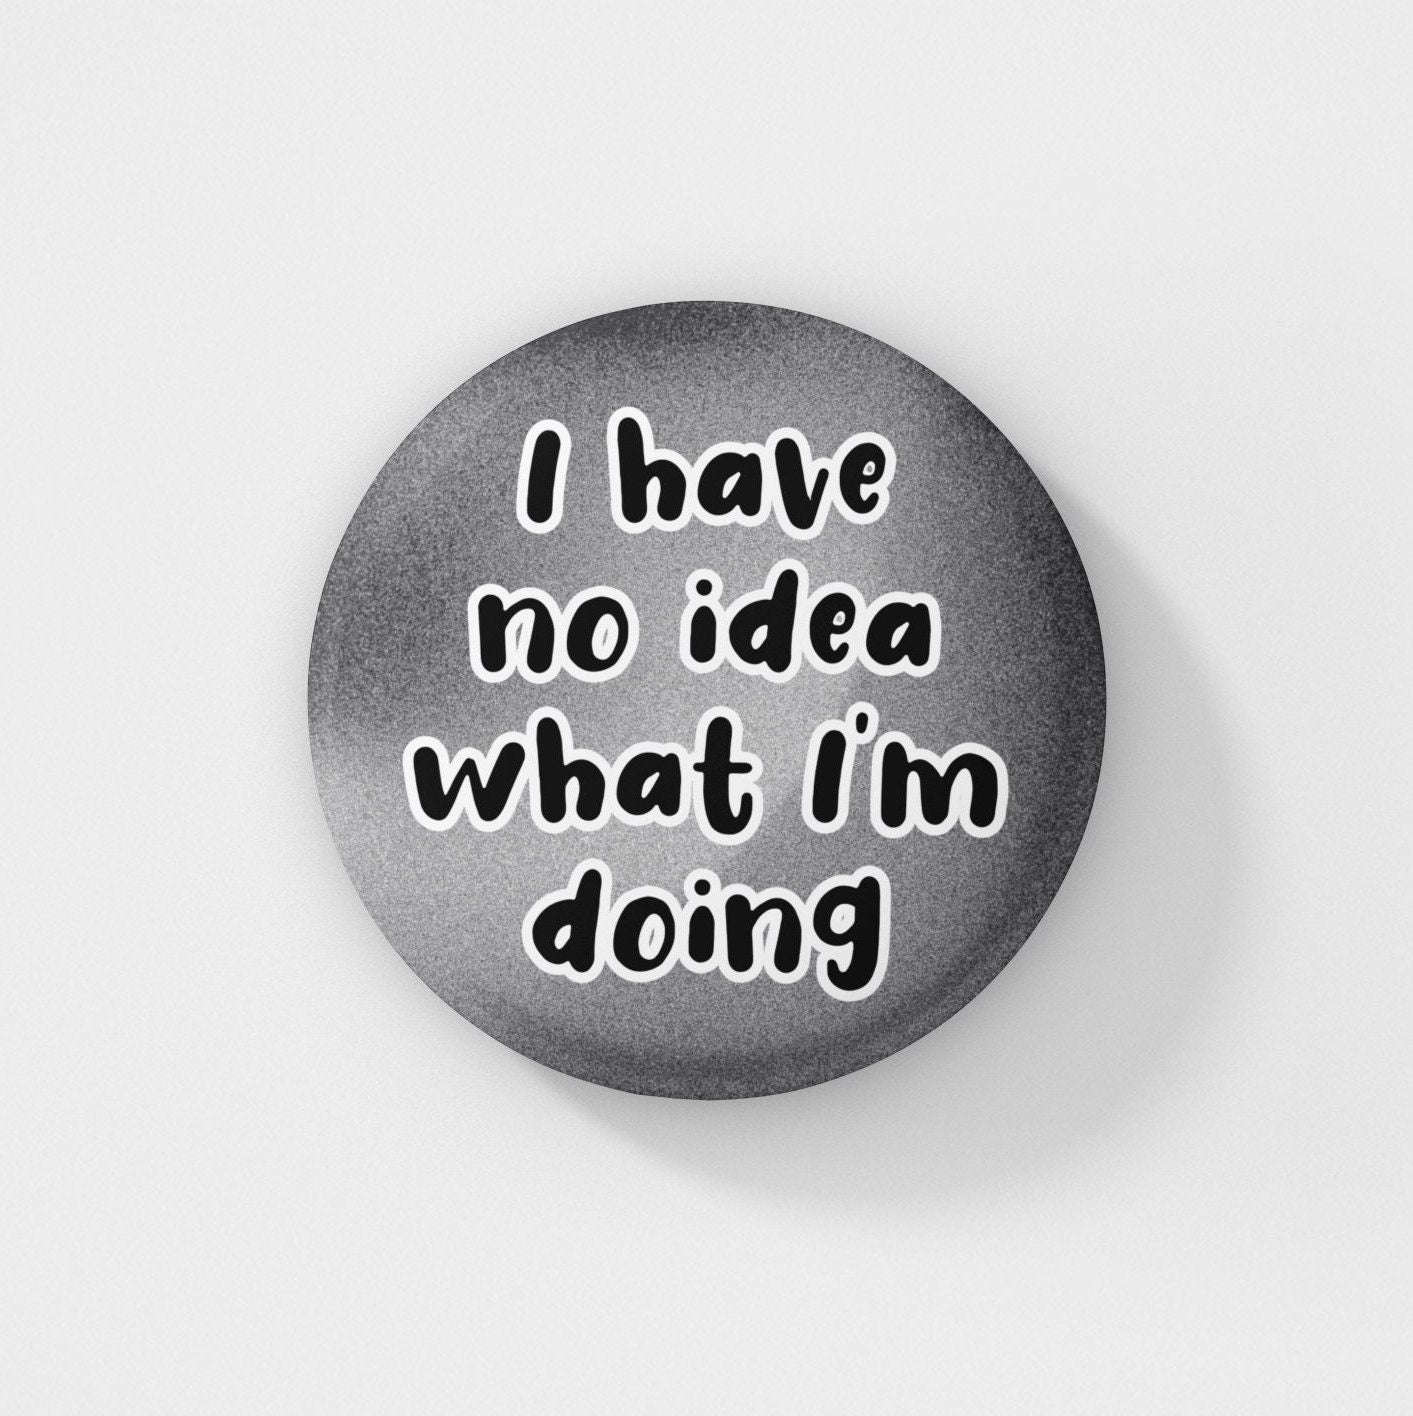 I Have No Idea What I'm Doing - Pin Badge | Funny Pins, Quotes, Friend Gifts